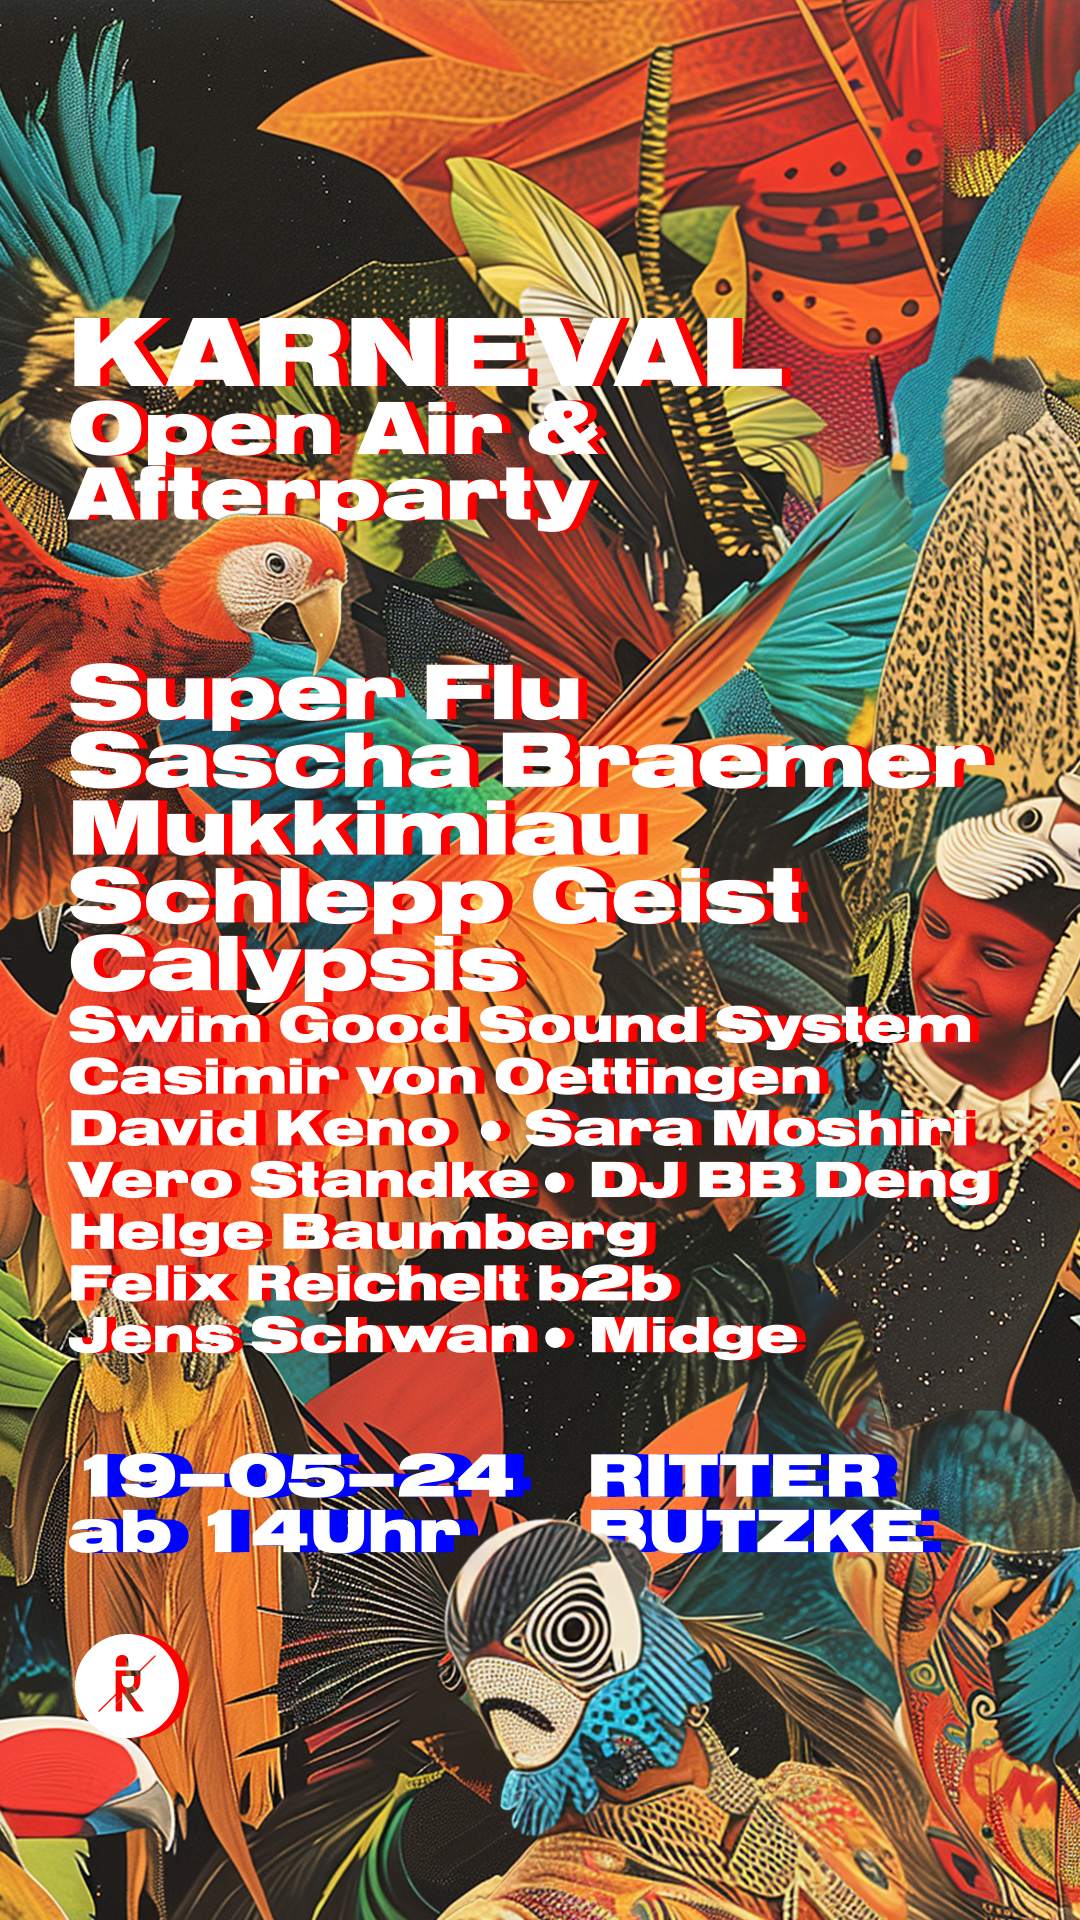 Karneval Open Air & Afterparty w/ Super Flu // free entry all night long - フライヤー裏